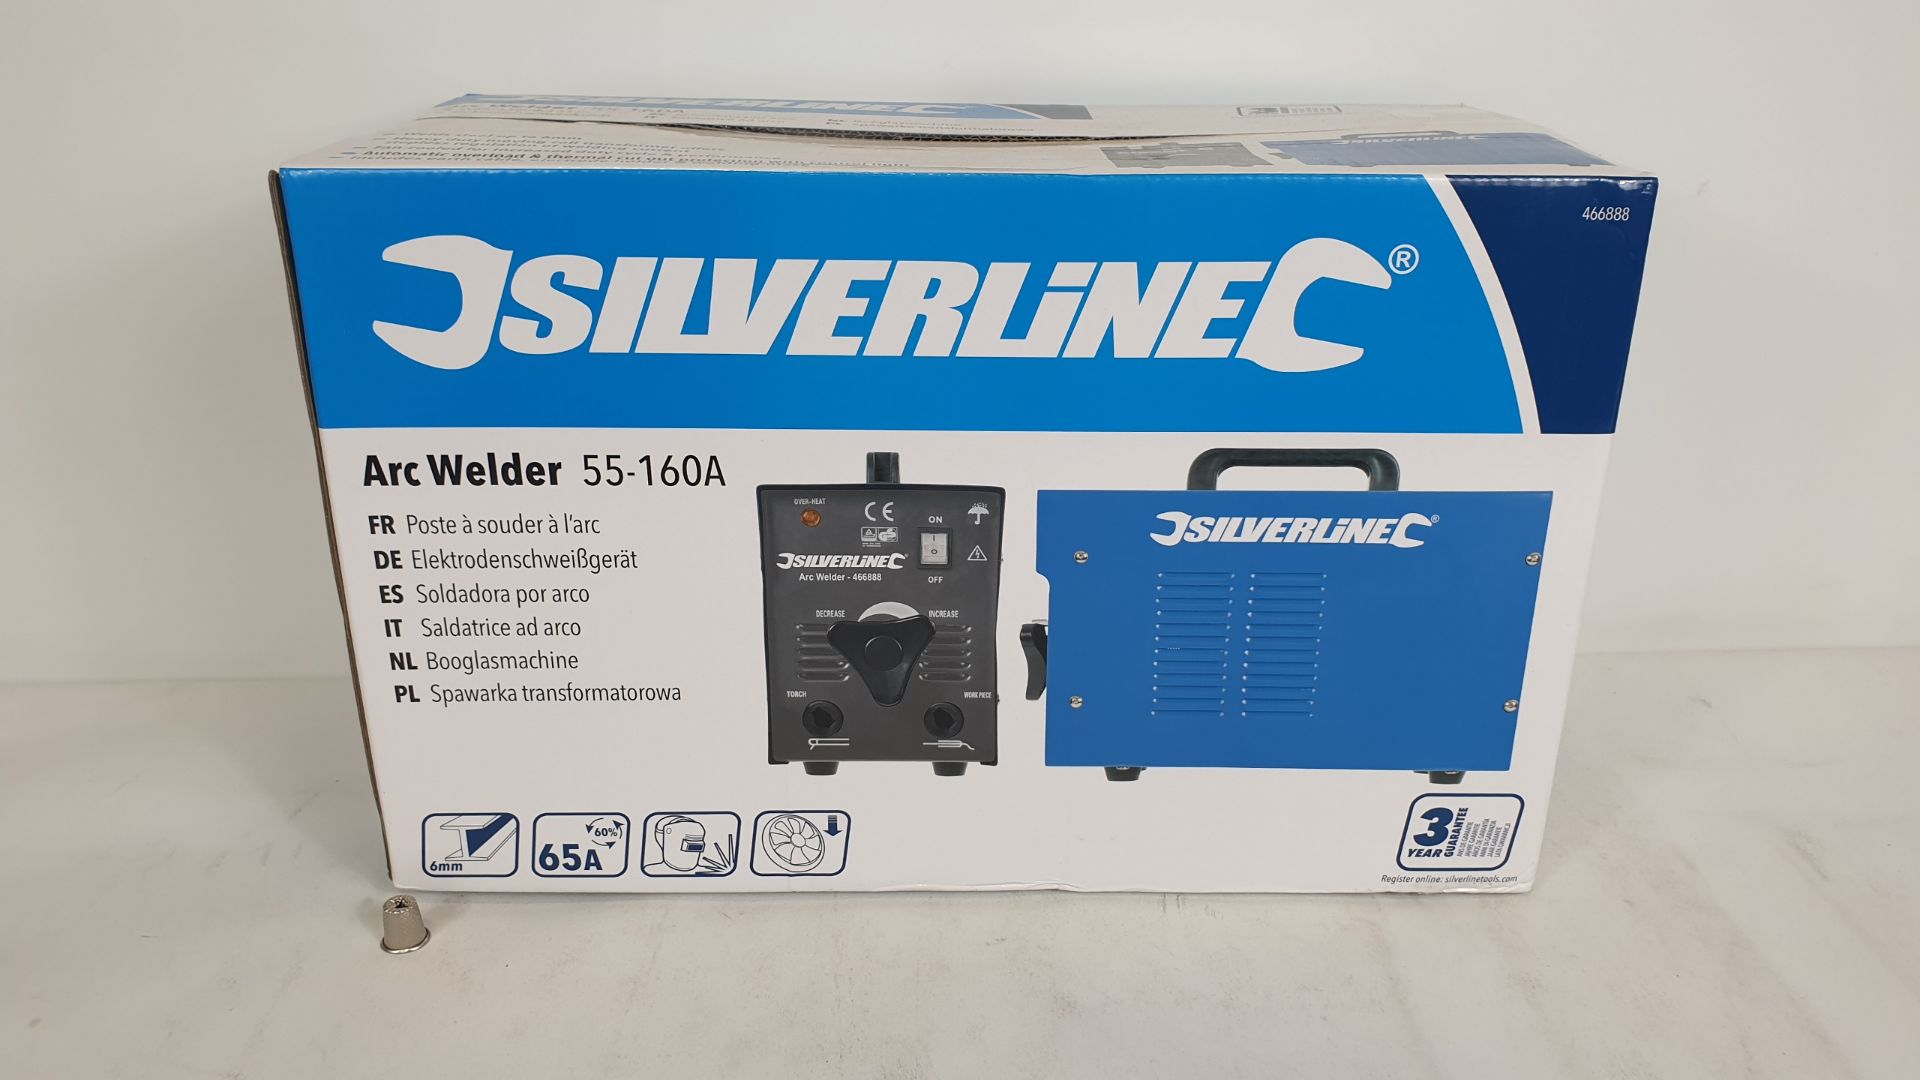 BRAND NEW BOXED SILVERLINE ARC WELDING SET 55 - 160A (PRODUCT CODE 466888) COMPRISING ARC WELDER,